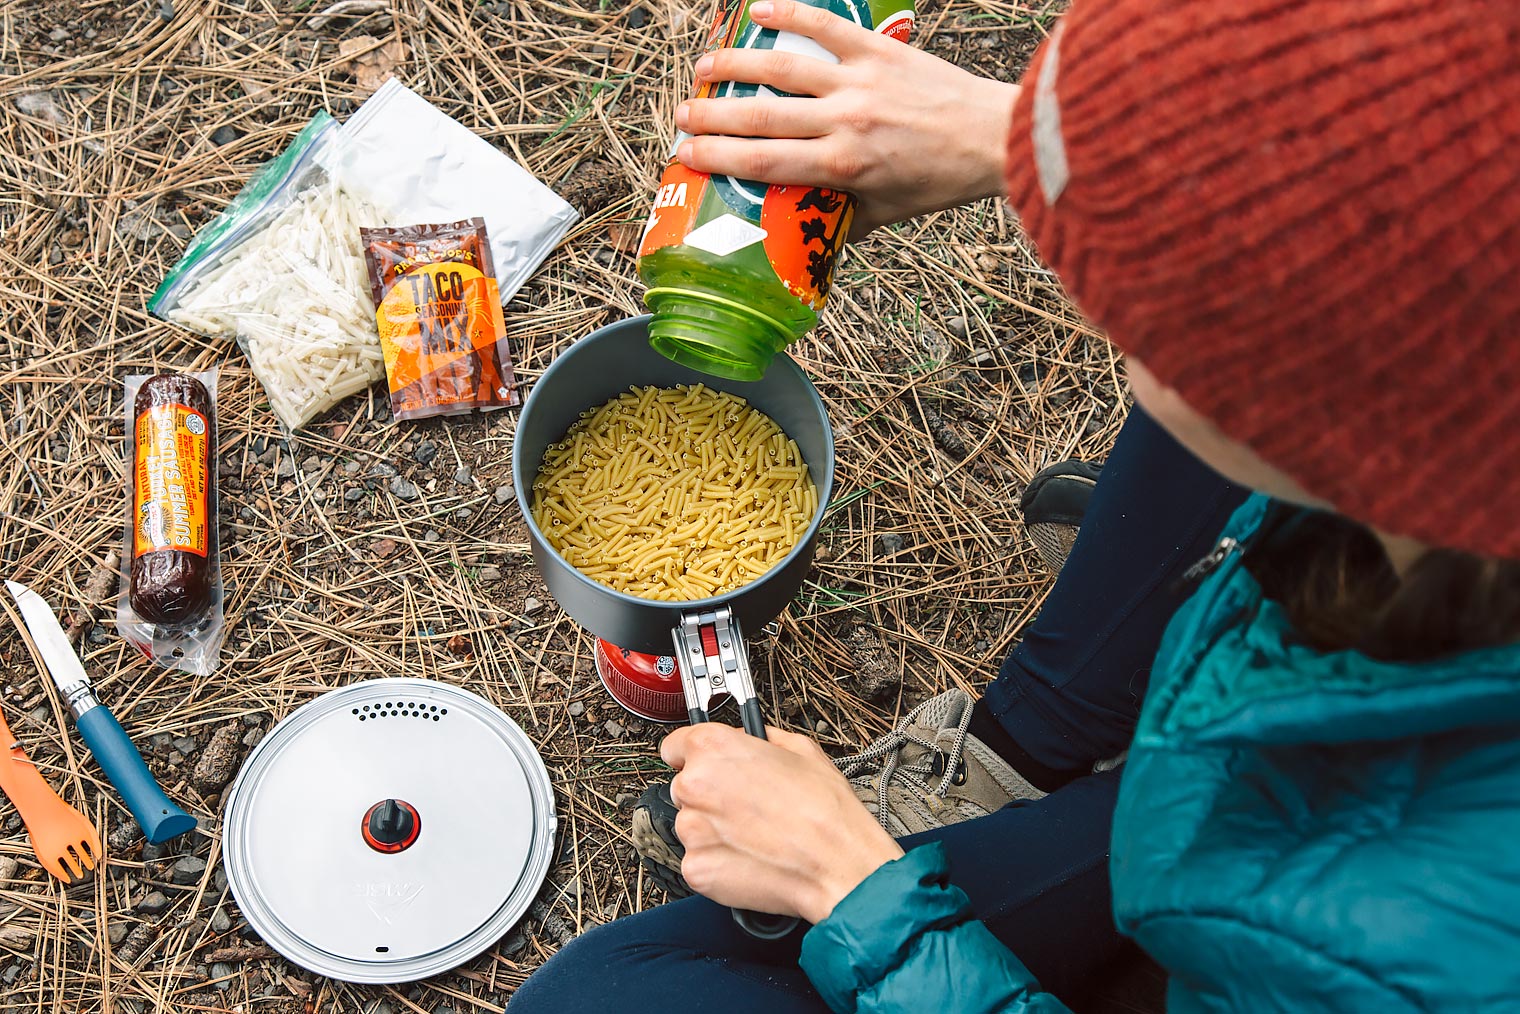 22 Simple Backpacking Meal Ideas from